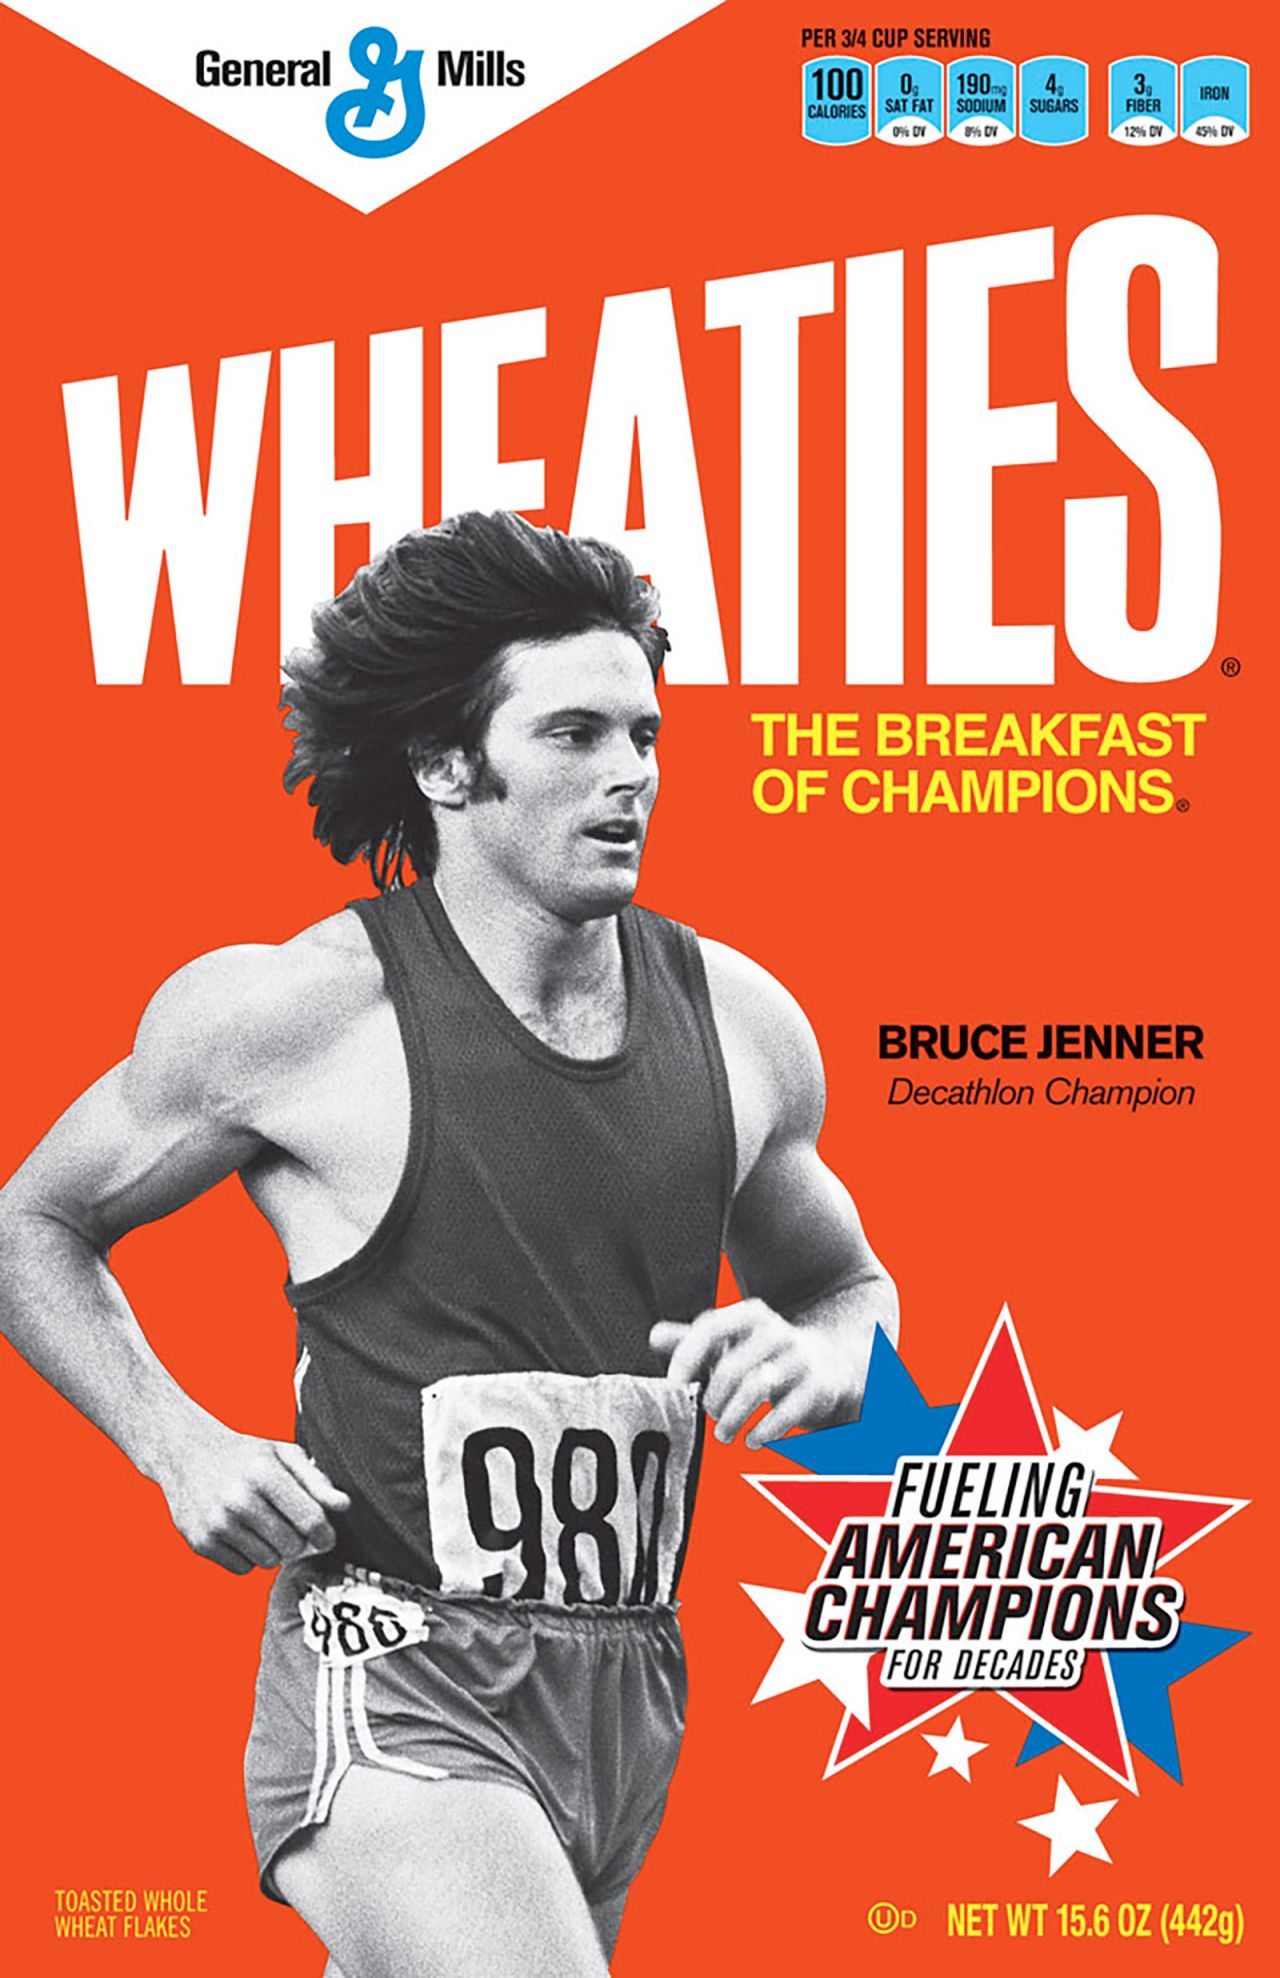 Wheaties featured retro images of Olympic champions, including Jenner, in 2012. 